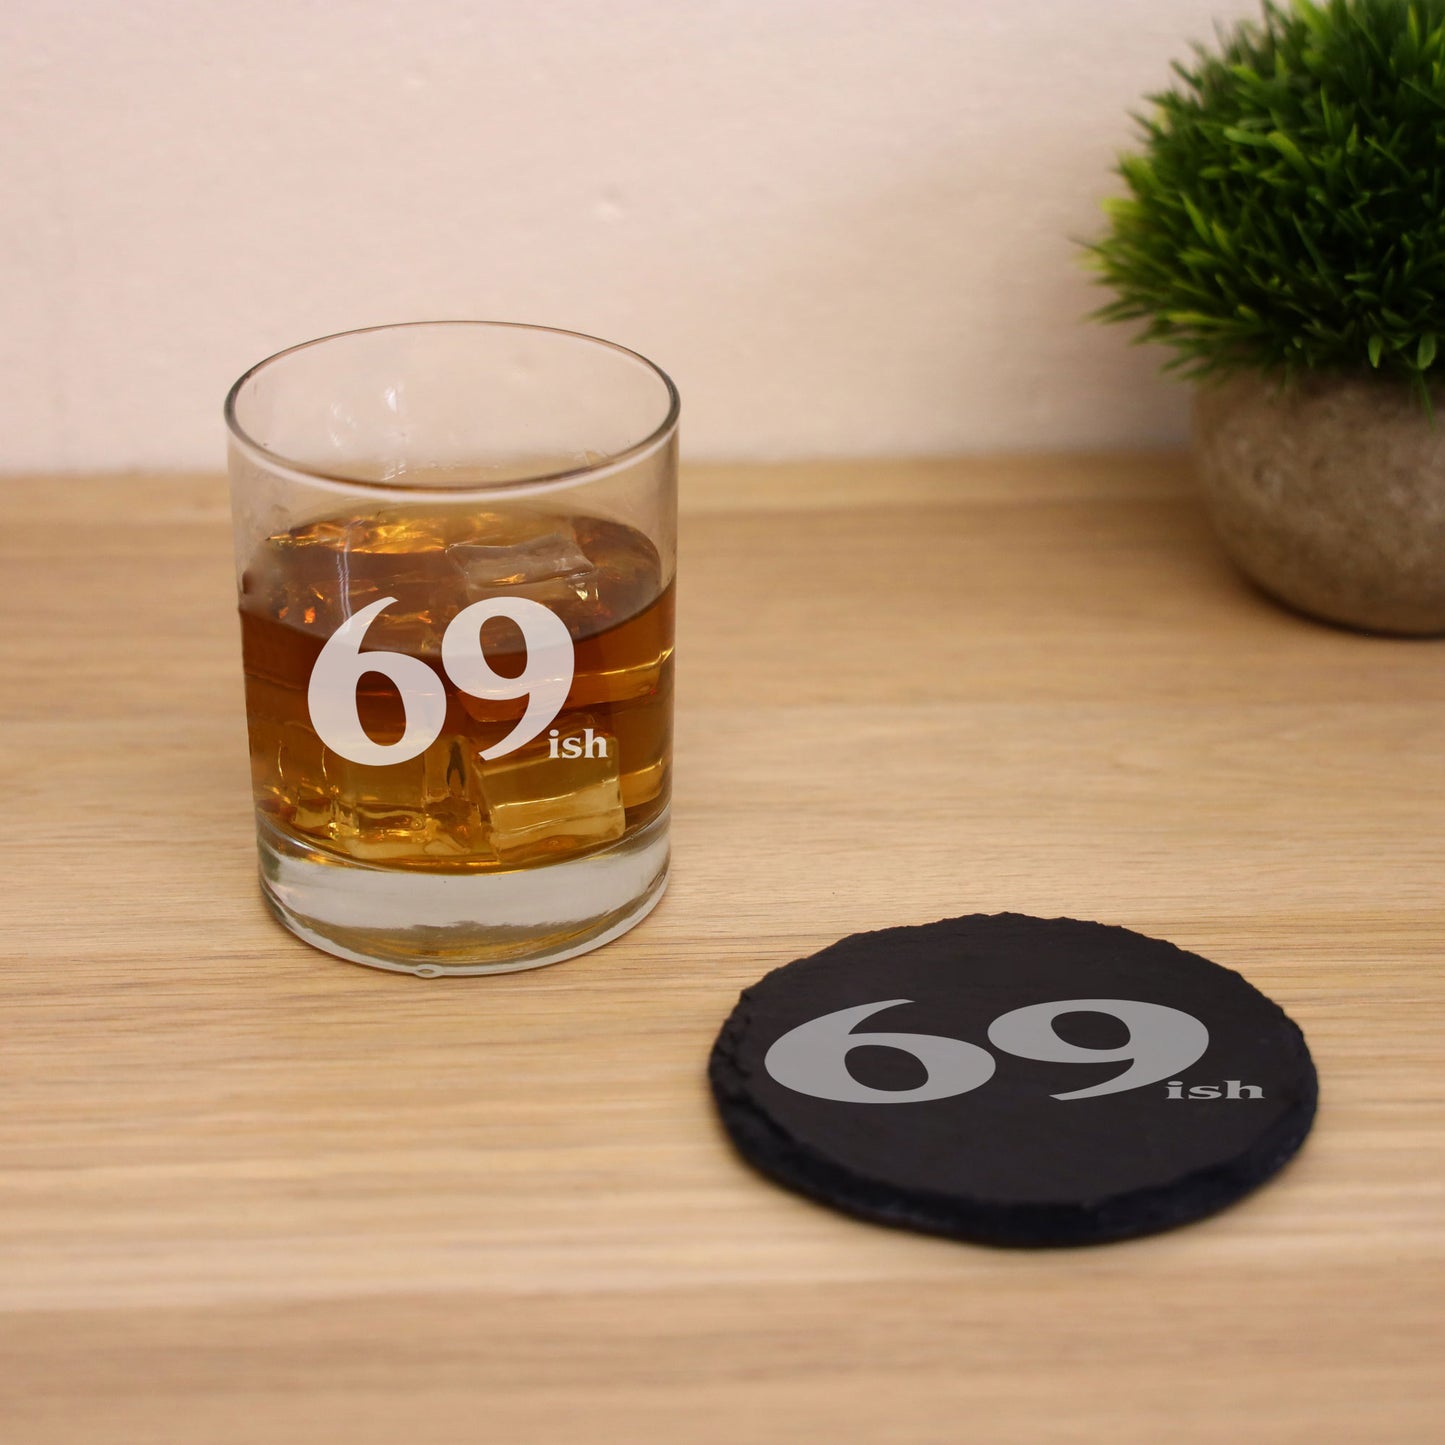 69ish Whisky Glass and/or Coaster Set  - Always Looking Good - Glass & Round Coaster Set  